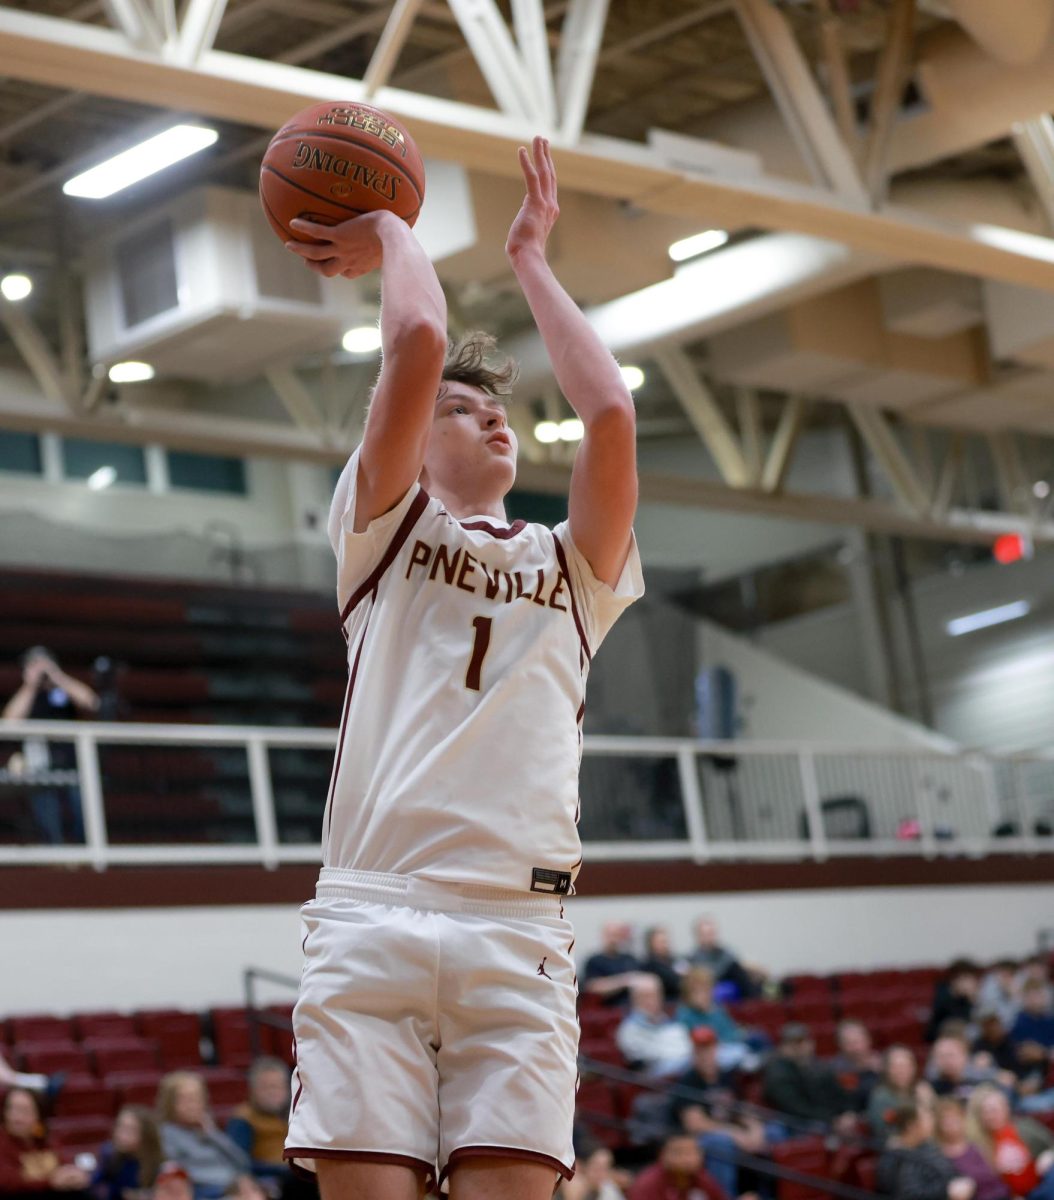 Pineville guard Ashton Moser scored 32 points as the Mountain Lions downed visiting Pineville 83-36.